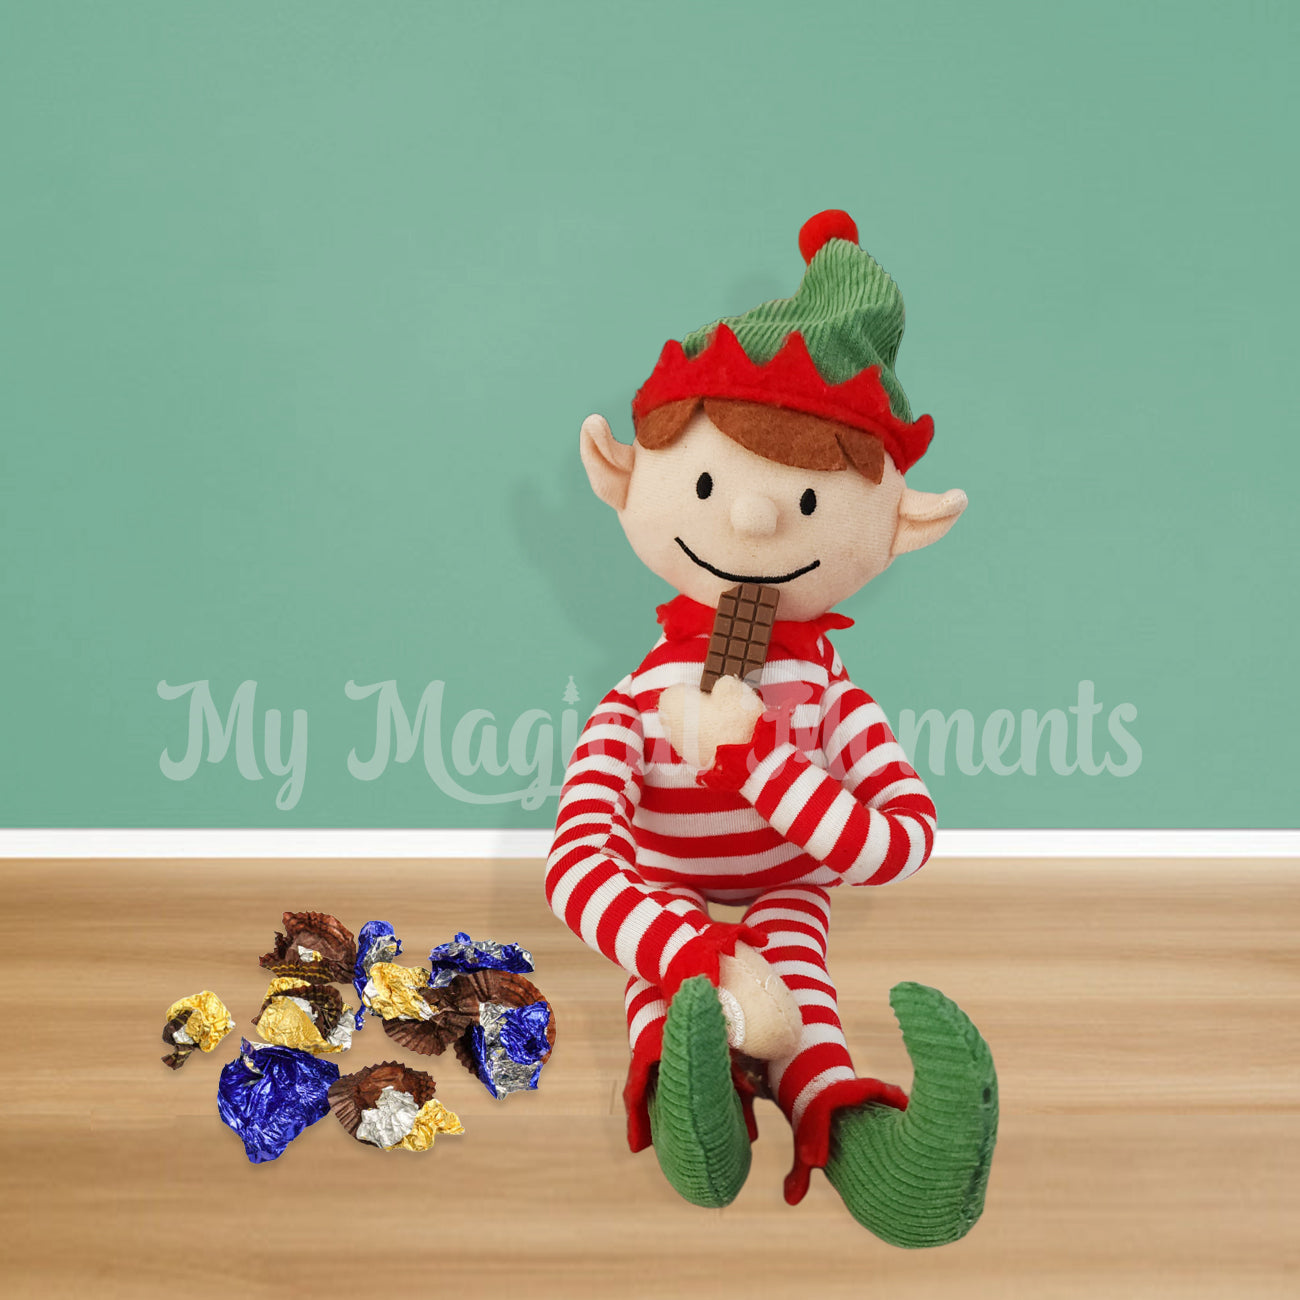 Chocolate elf food prop in a elf scene with an elf for Christmas